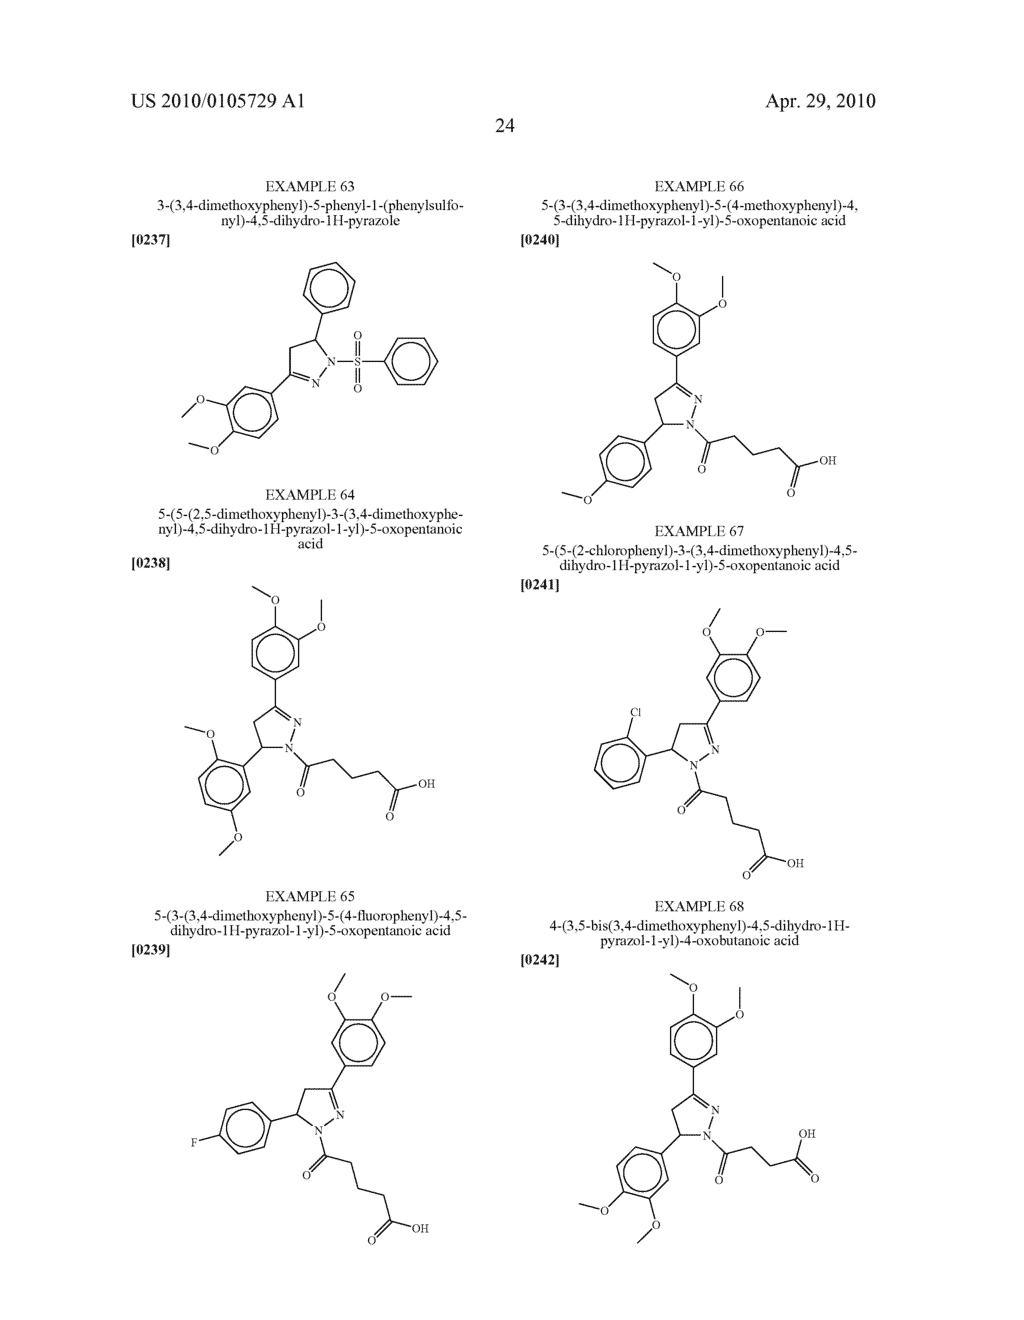 ARYL-SUBSTITUTED HETEROCYCLIC PDE4 INHIBITORS AS ANTI-INFLAMMATORY AGENTS - diagram, schematic, and image 25